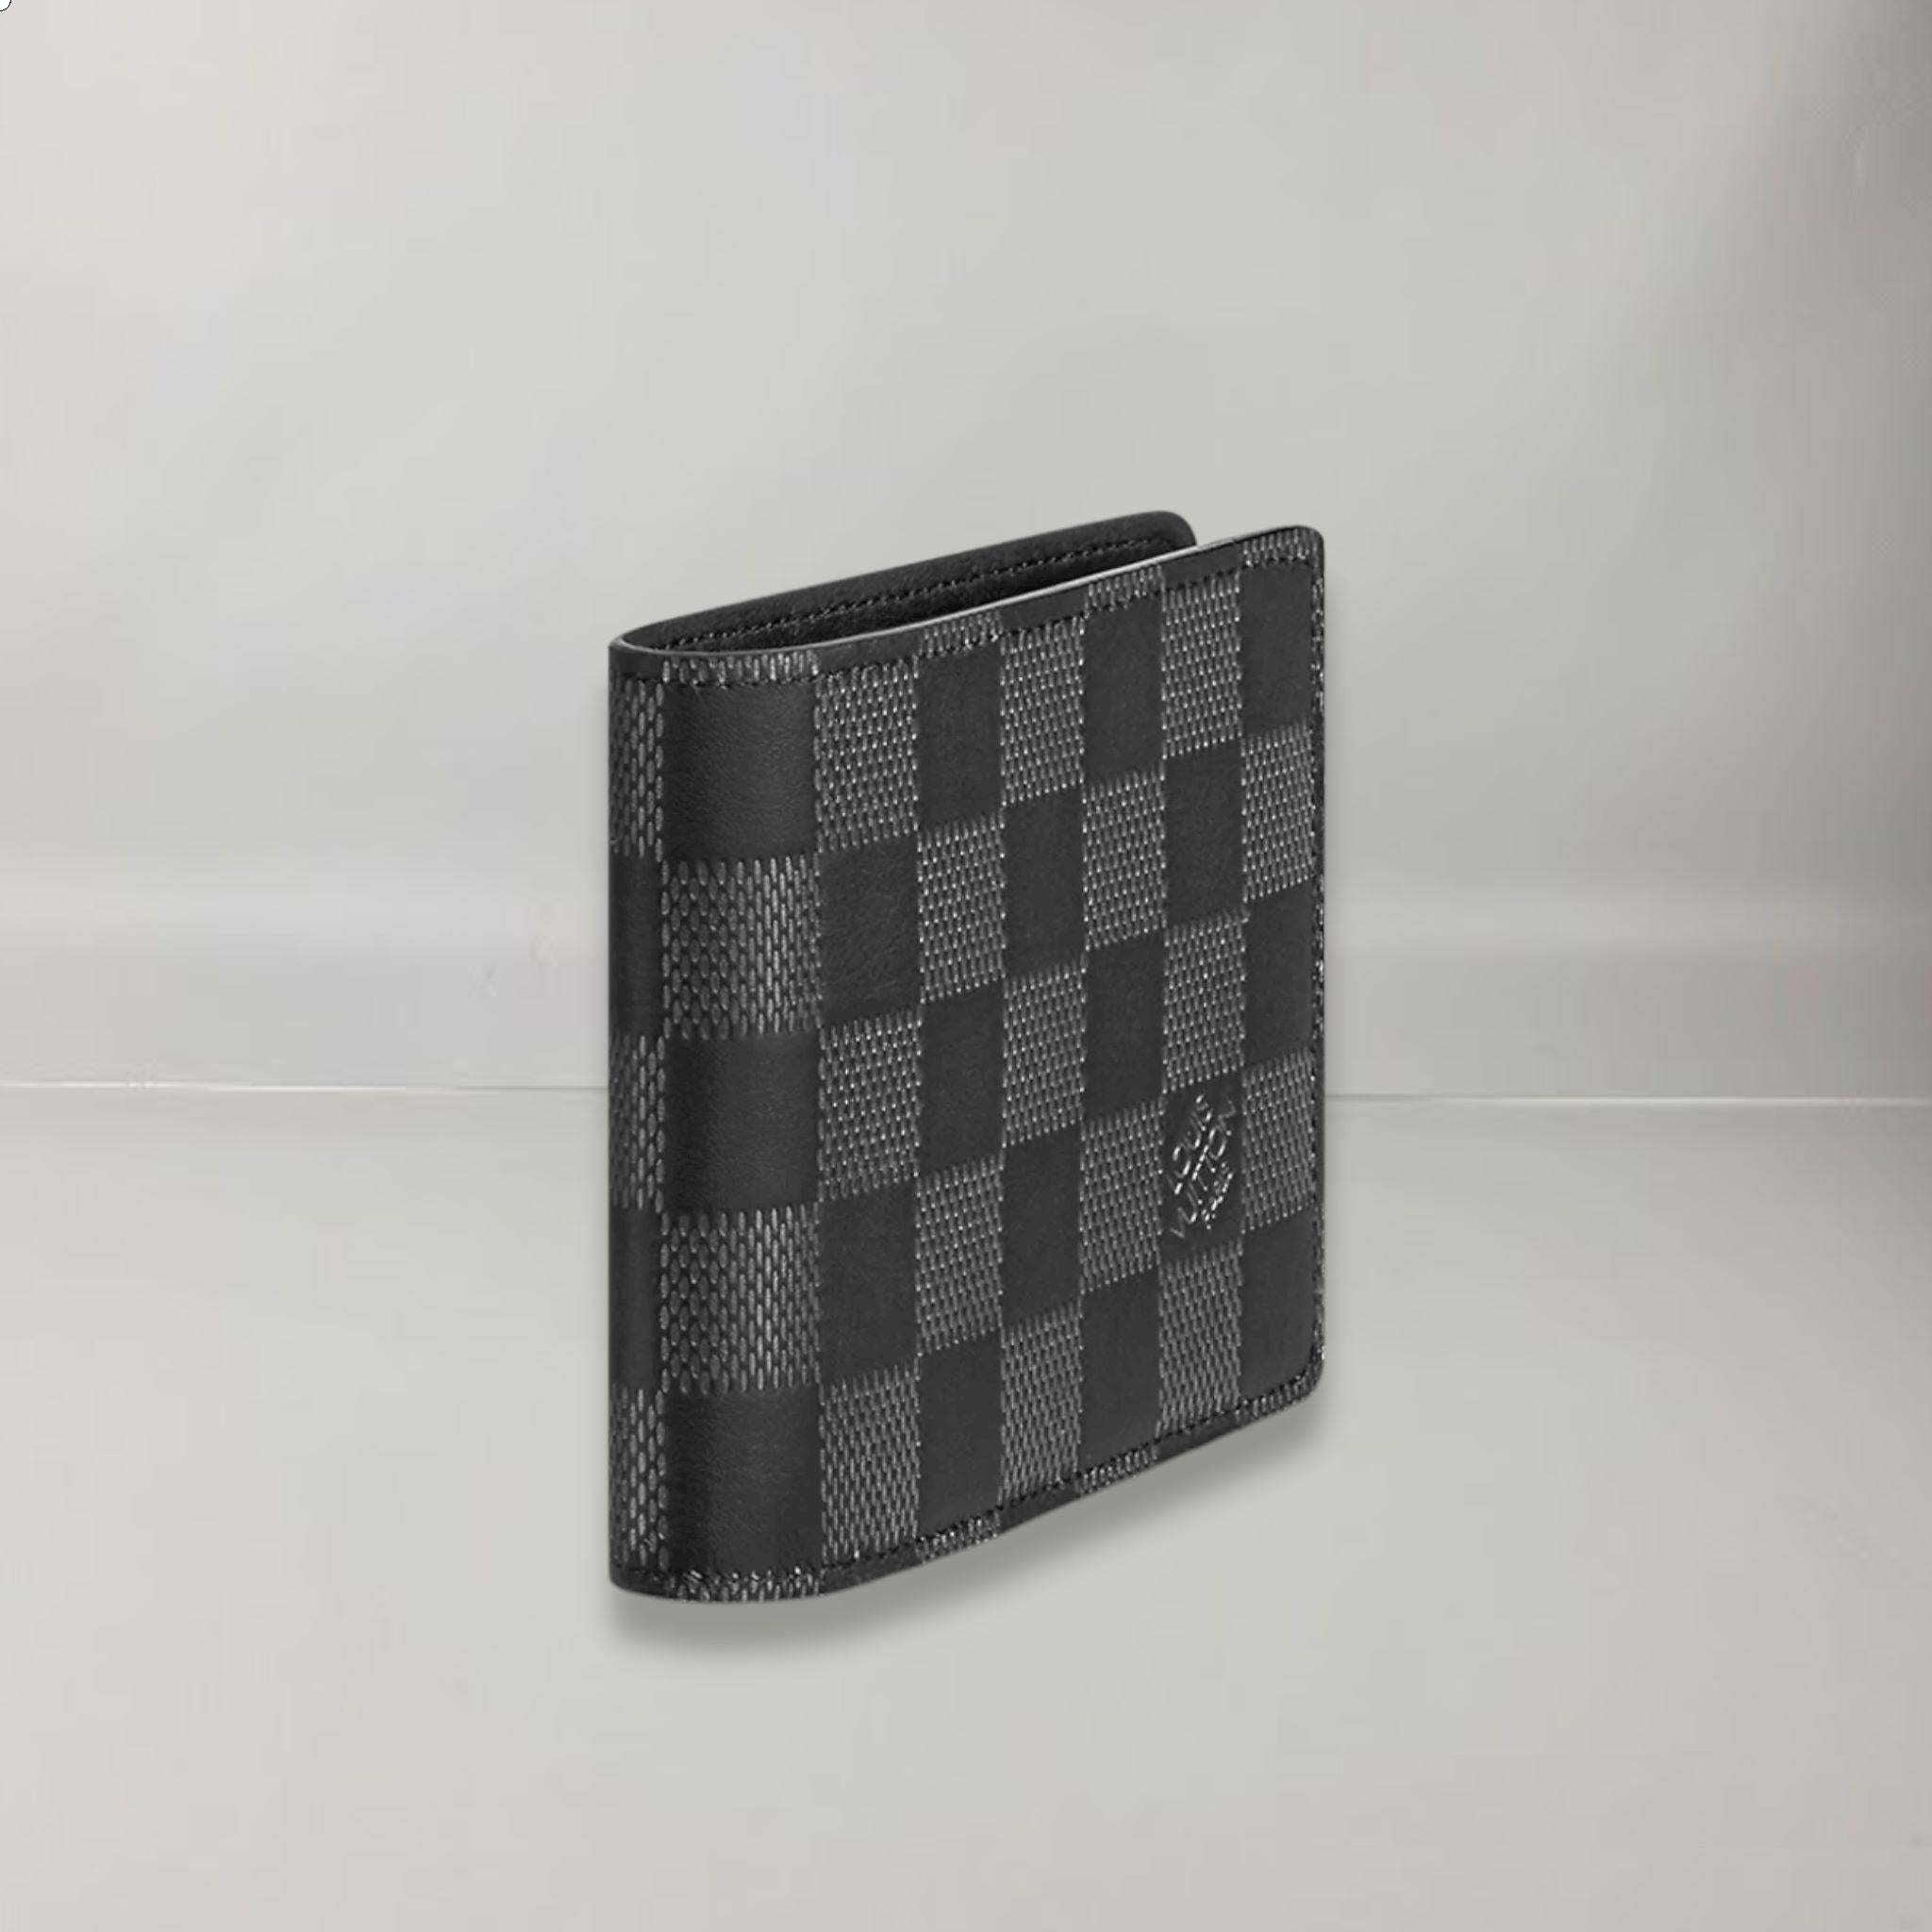 Louis Vuitton Multiple Wallet Damier Infini Onyx in Leather - US